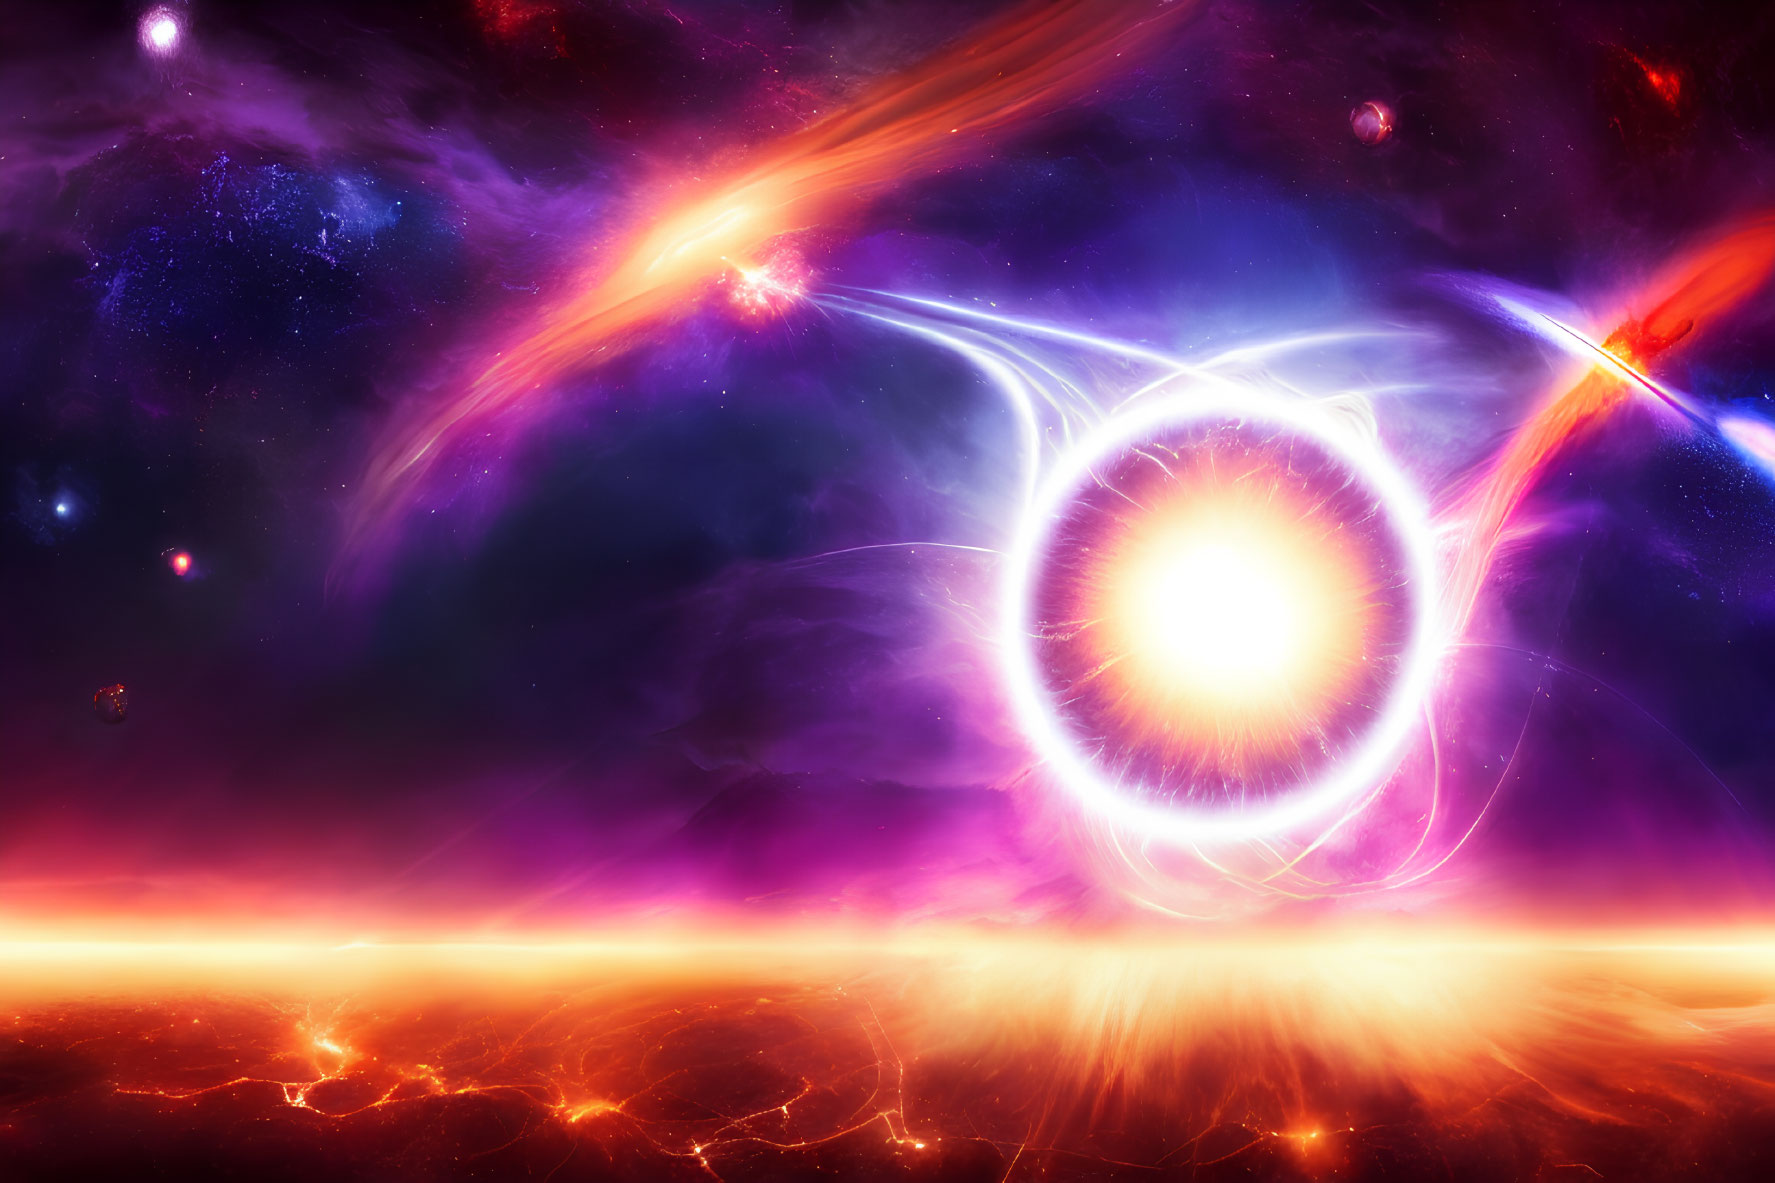 Vibrant cosmic scene with glowing star and swirling energy.